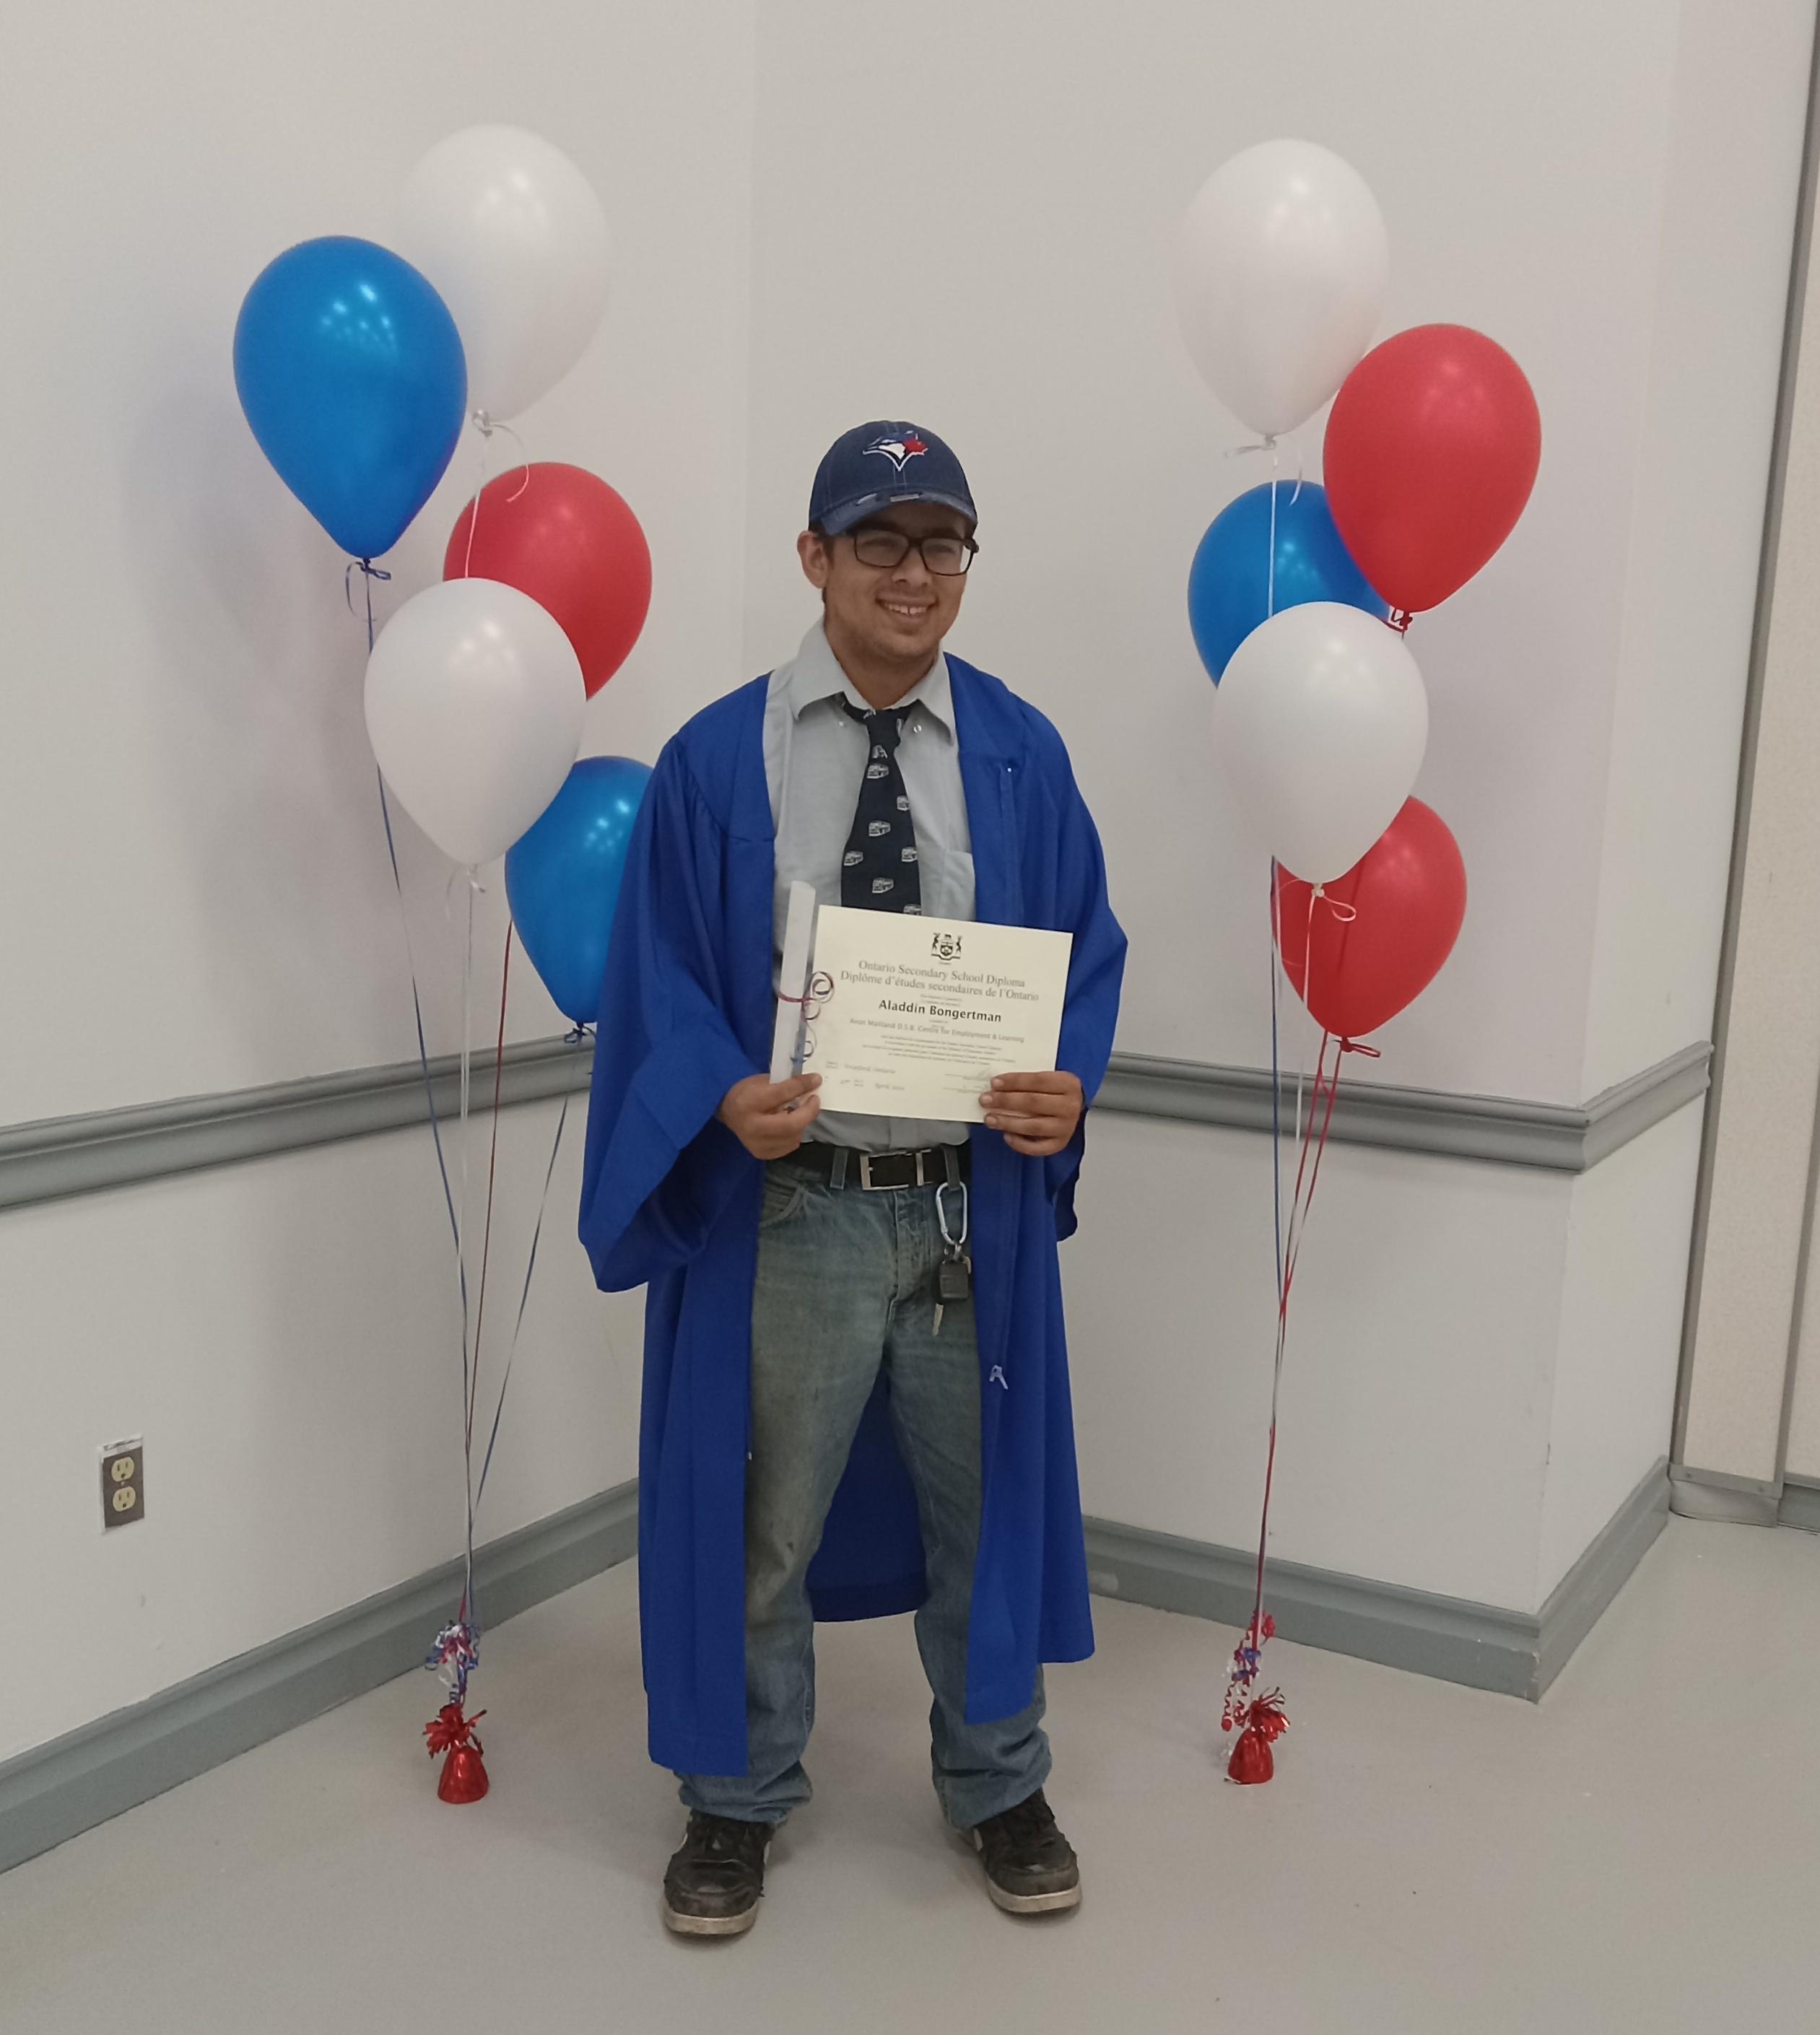 Aladdin poses in his gown with his diploma, red, white, and blue balloons in backgroundf